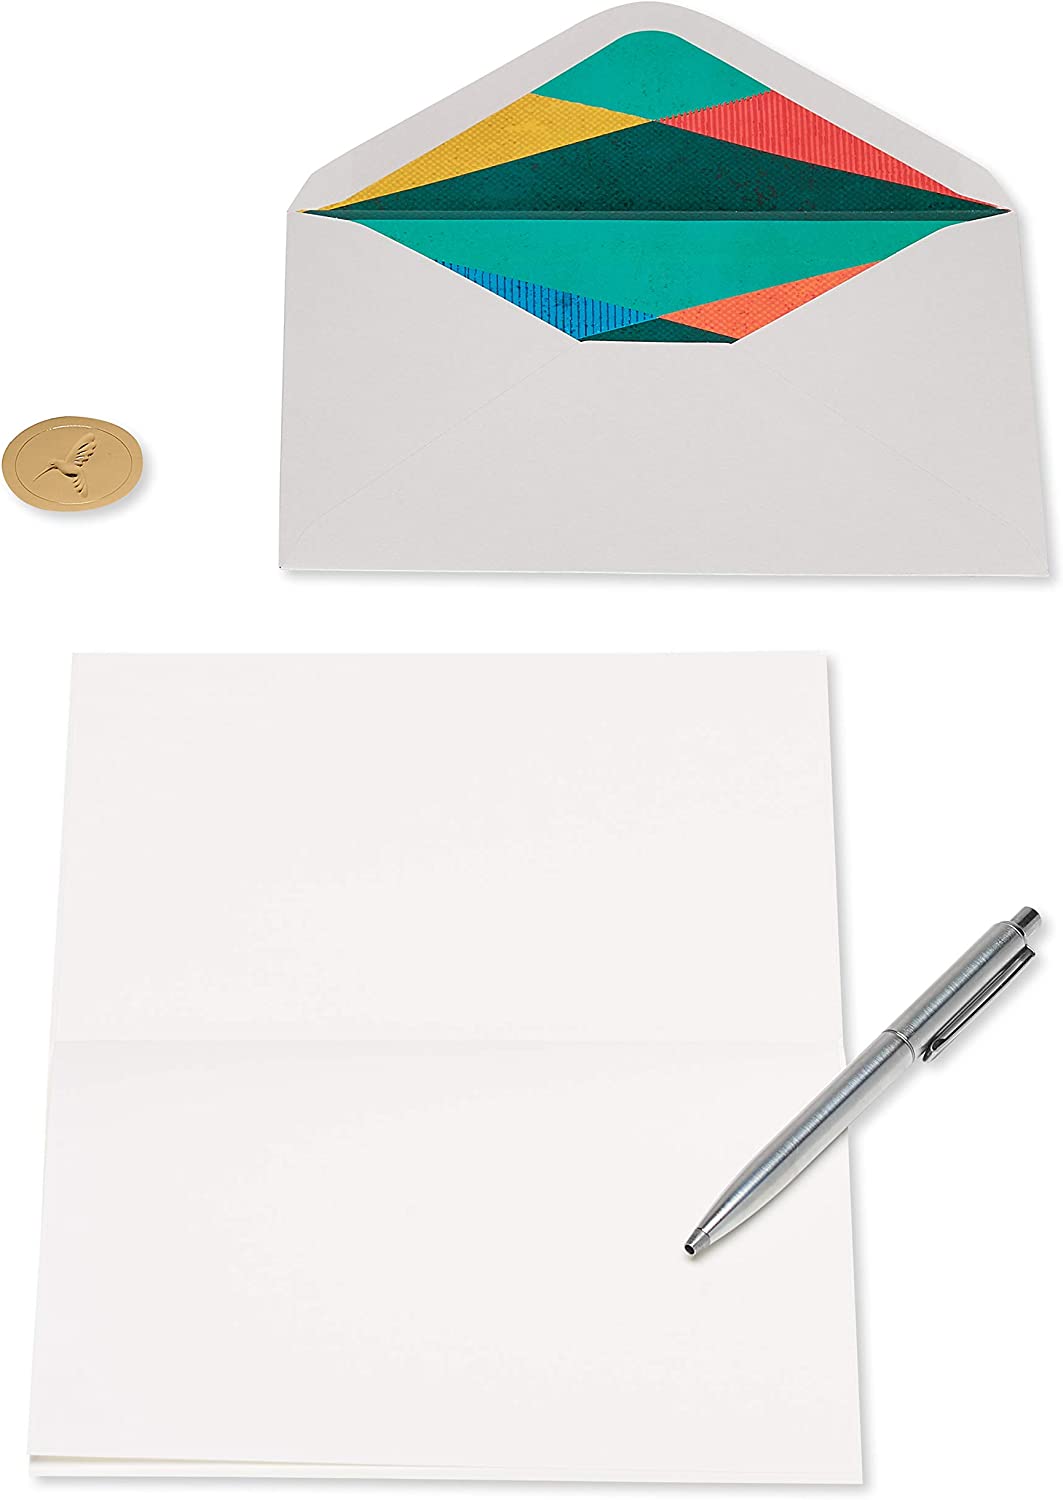 Papyrus Blank Thank You Card (Many Thanks)